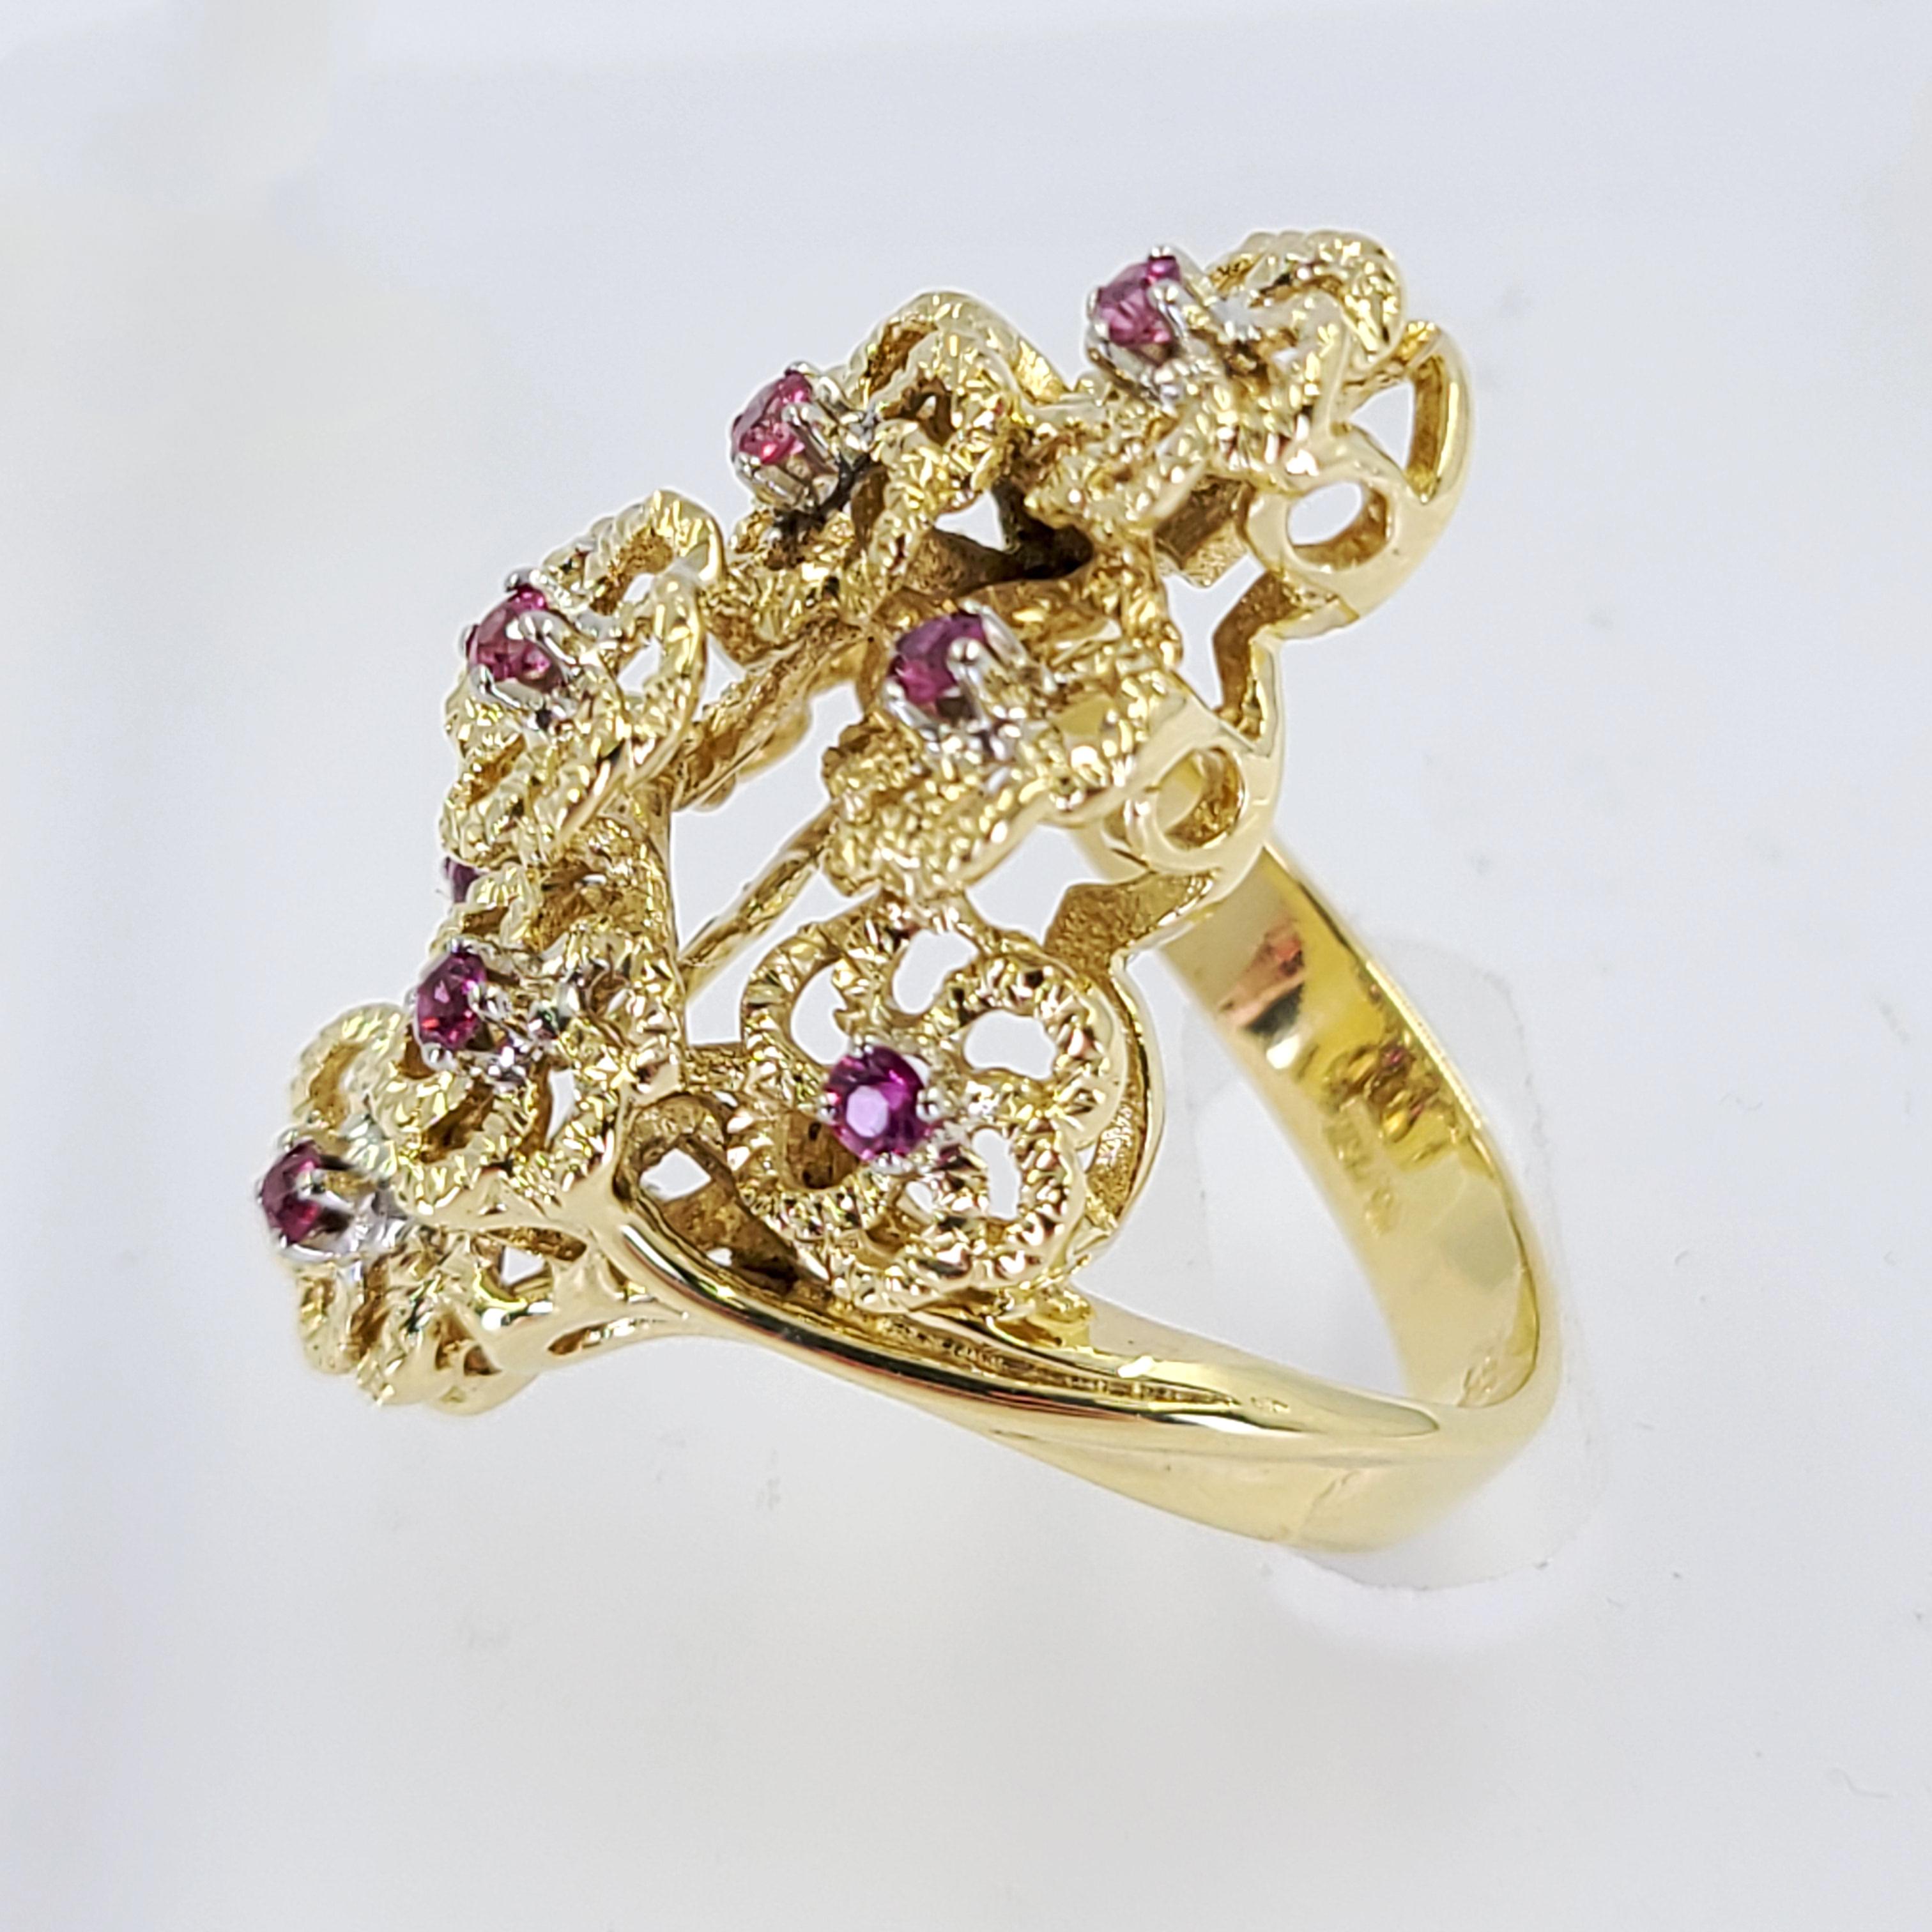 18 Karat Yellow Gold Dinner Ring Featuring 9 Round Rubies Totaling Approximately 0.30 Carats On A Swirled Flower Design. Finger Size 5.5; Purchase Includes One Sizing Service Prior to Shipment. Finished Weight Is 10.0 Grams.